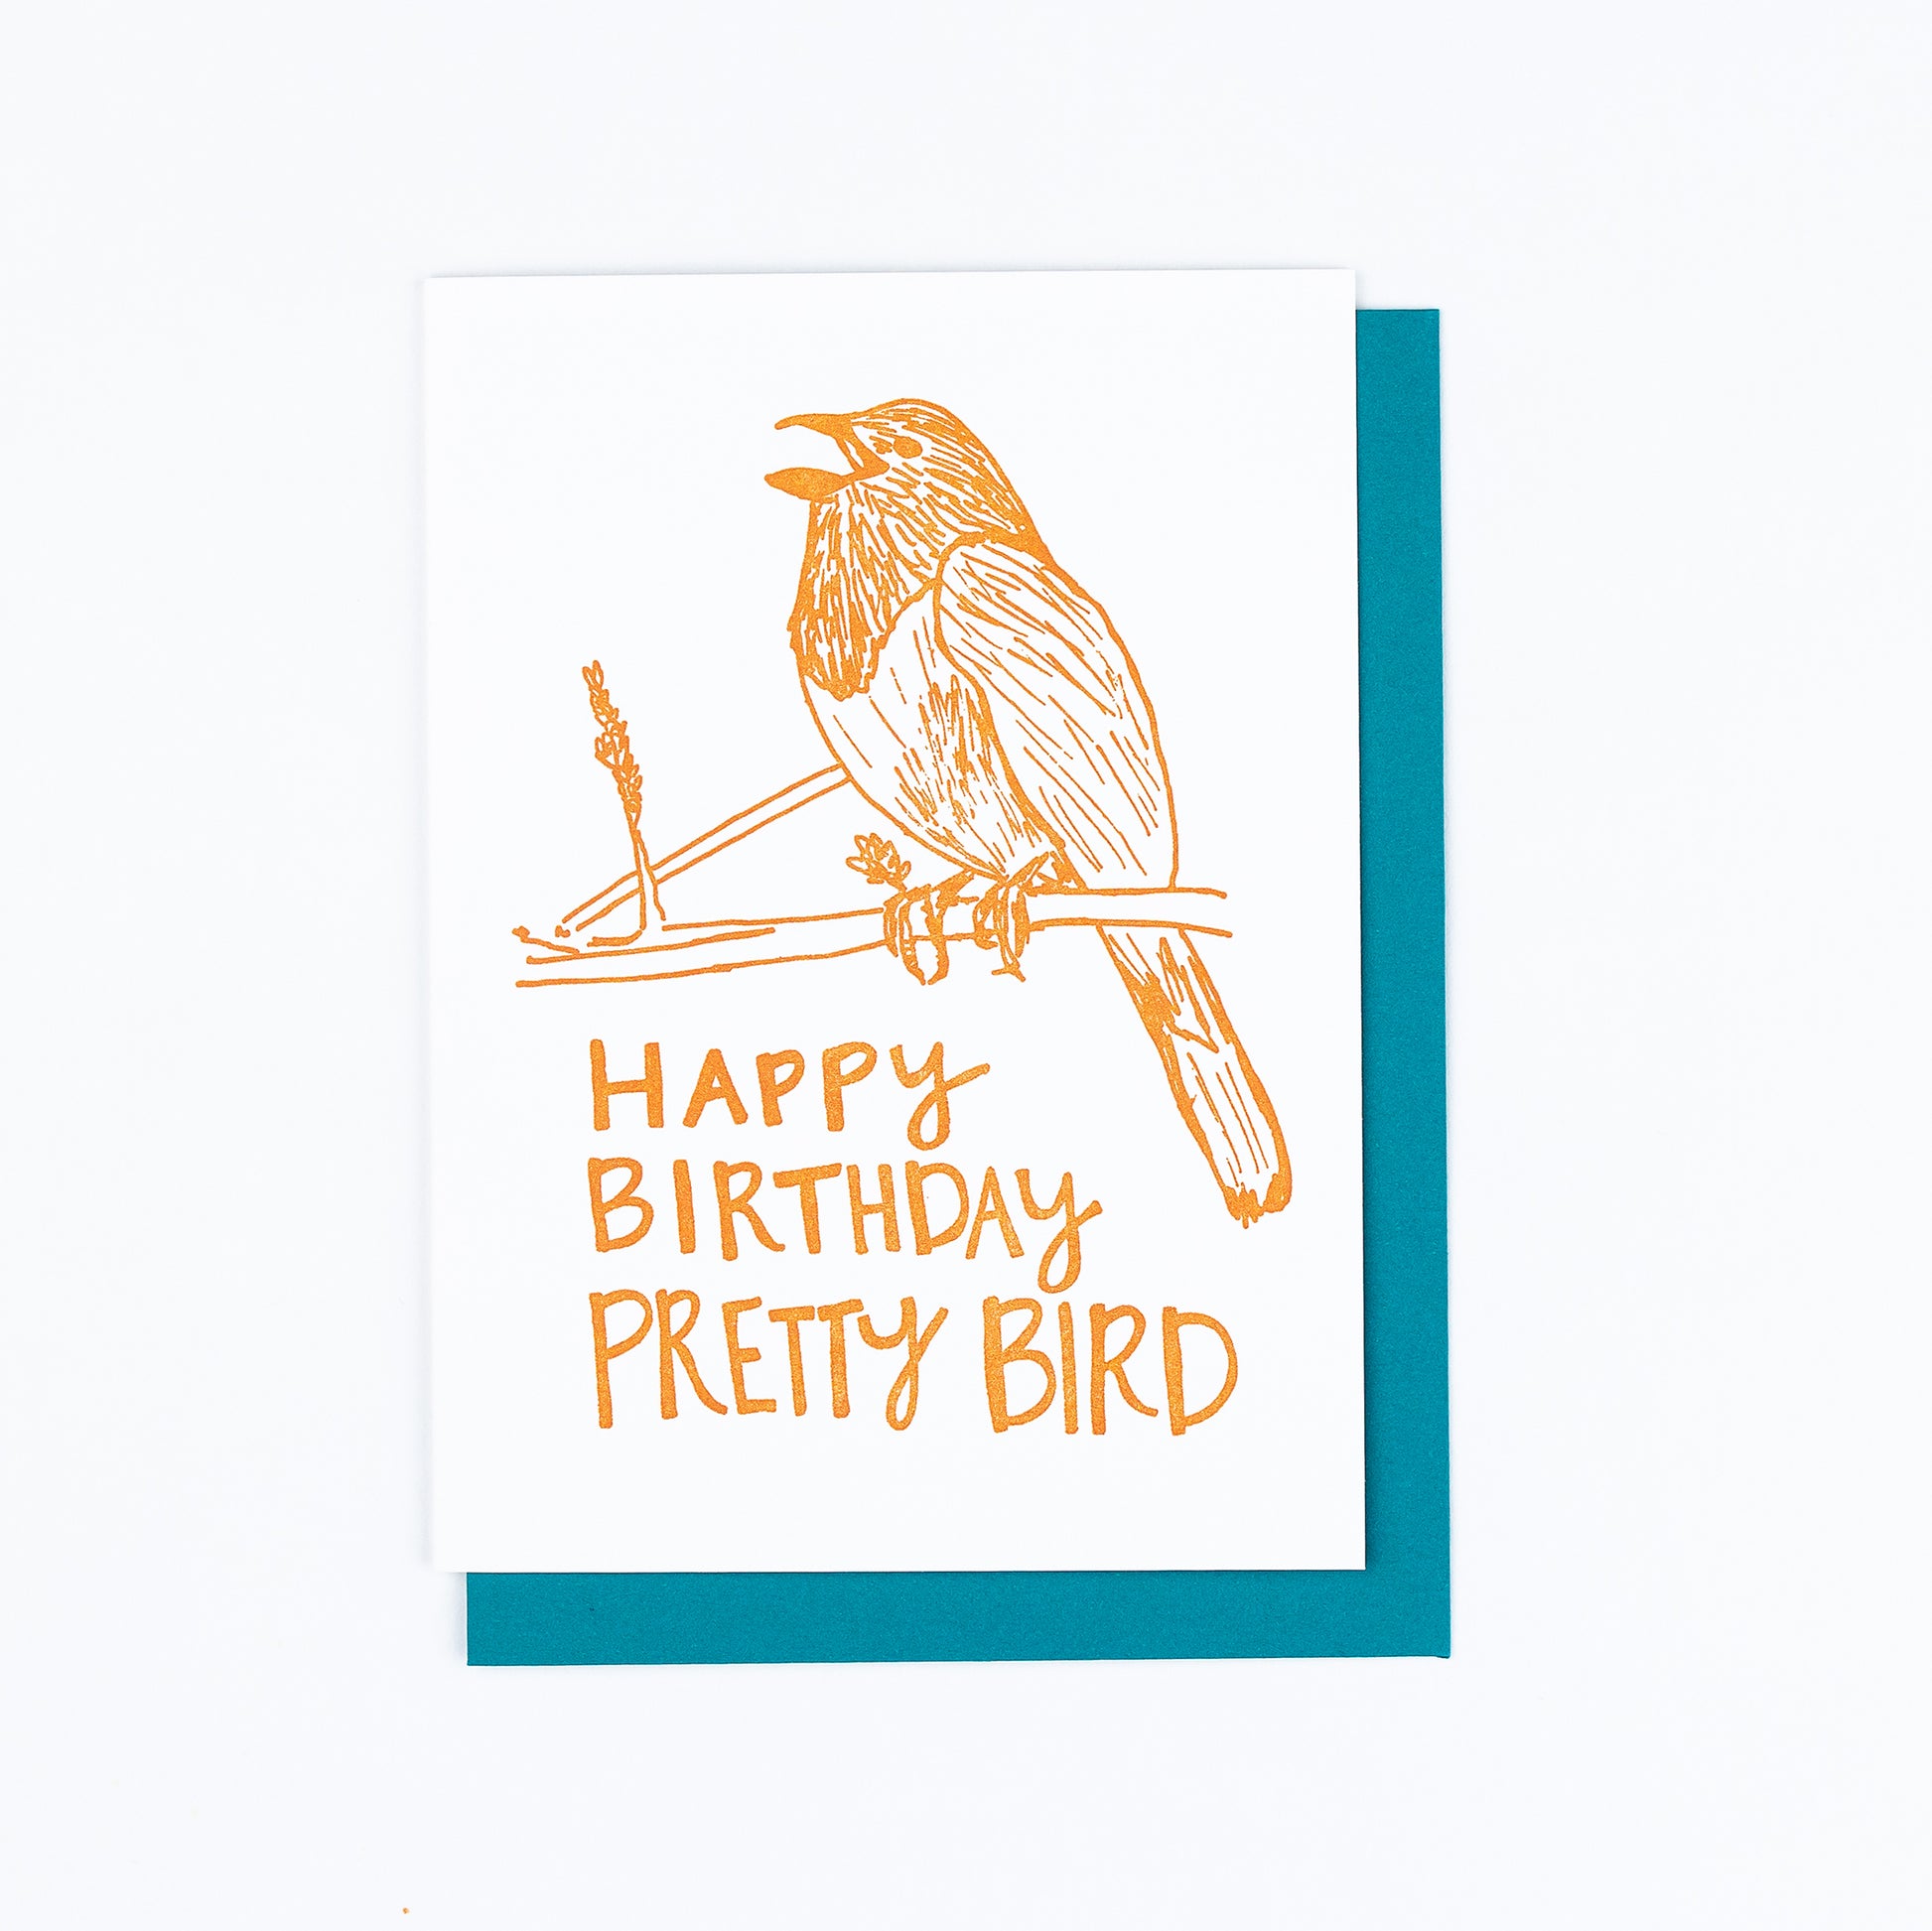 Letterpress greeting card featuring a hand-drawn Eastern towhee printed in a vibrant dark orange ink. The bottom of the card says "Happy Birthday Pretty Bird!" in a whimsical hand-drawn text, in the same dark orange ink. The card is white, blank inside, and is paired with a deep turquoise envelope.